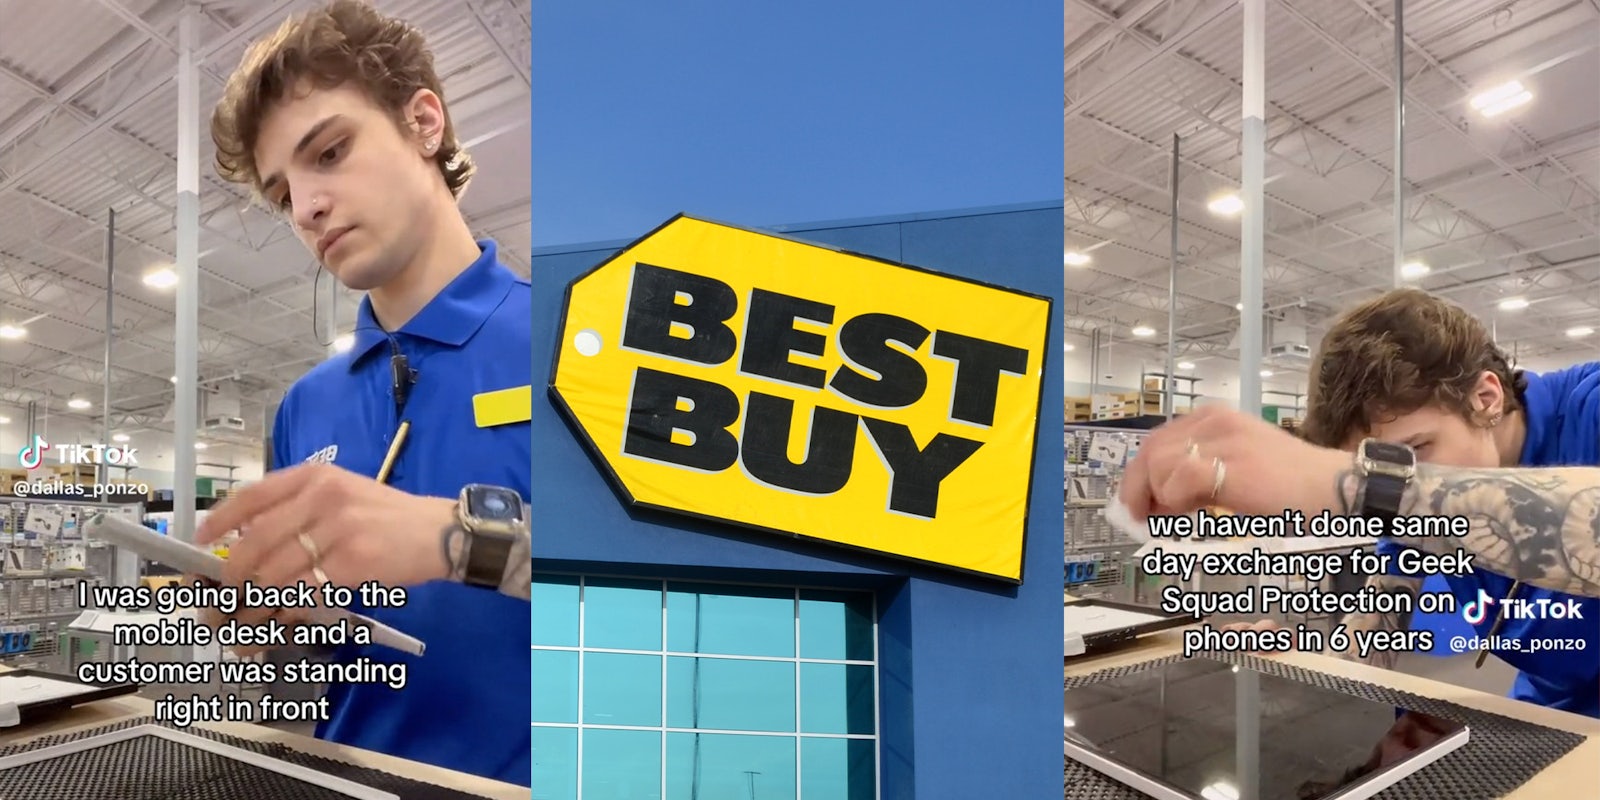 Best Buy customer won’t accept they won’t exchange her cracked phone